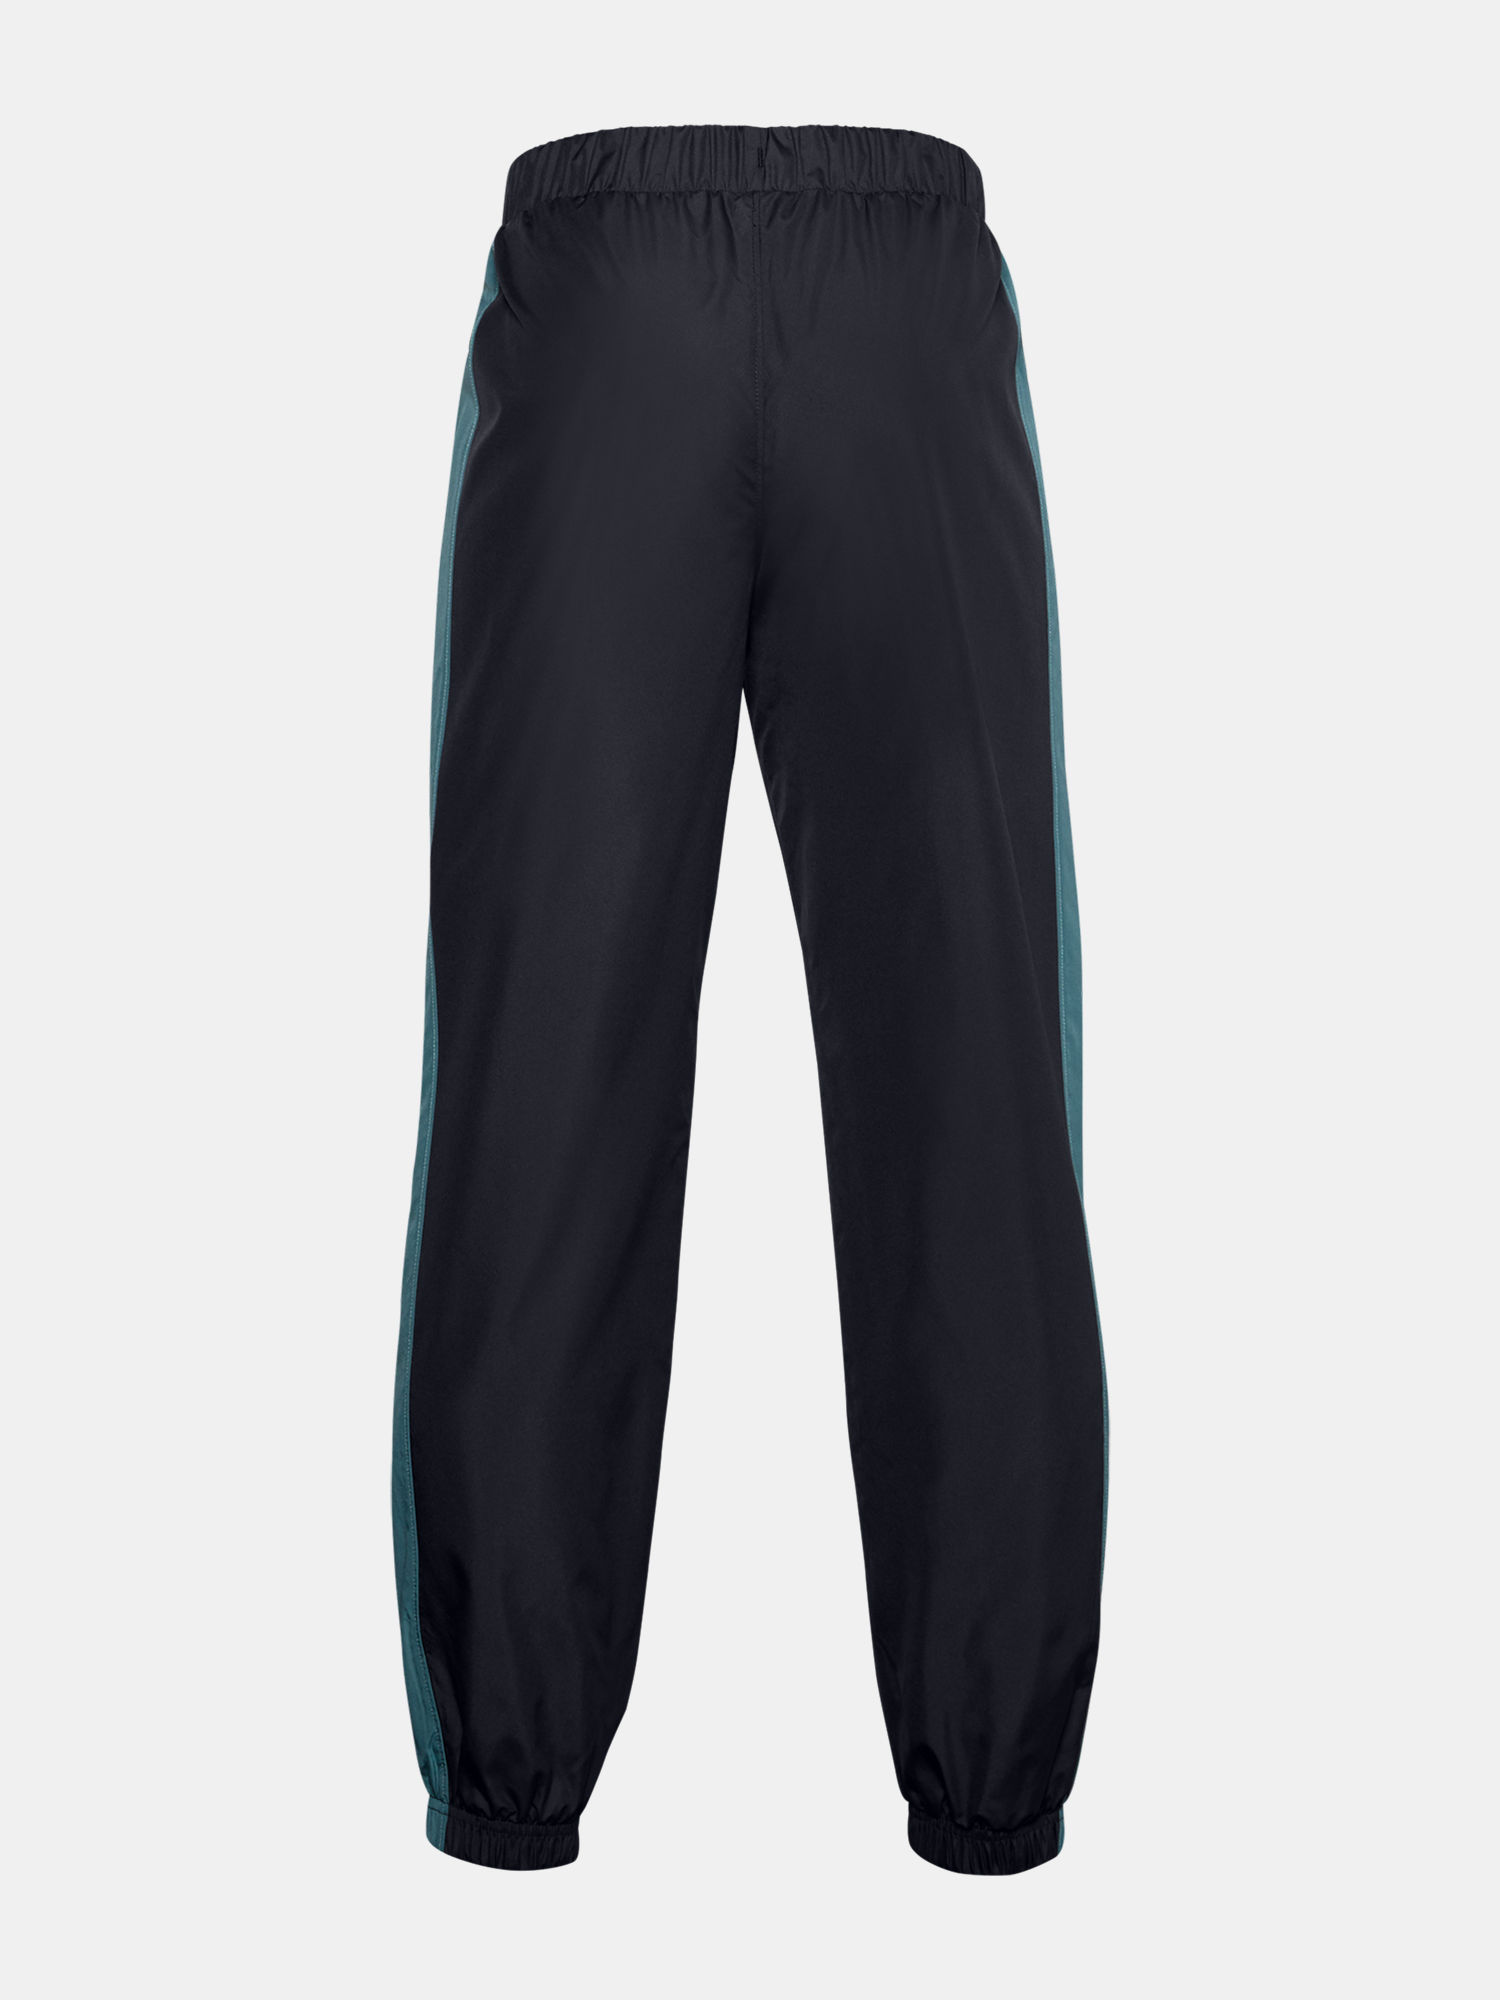 Tepláky Under Armour Mesh Lined Pants-BLK (2)